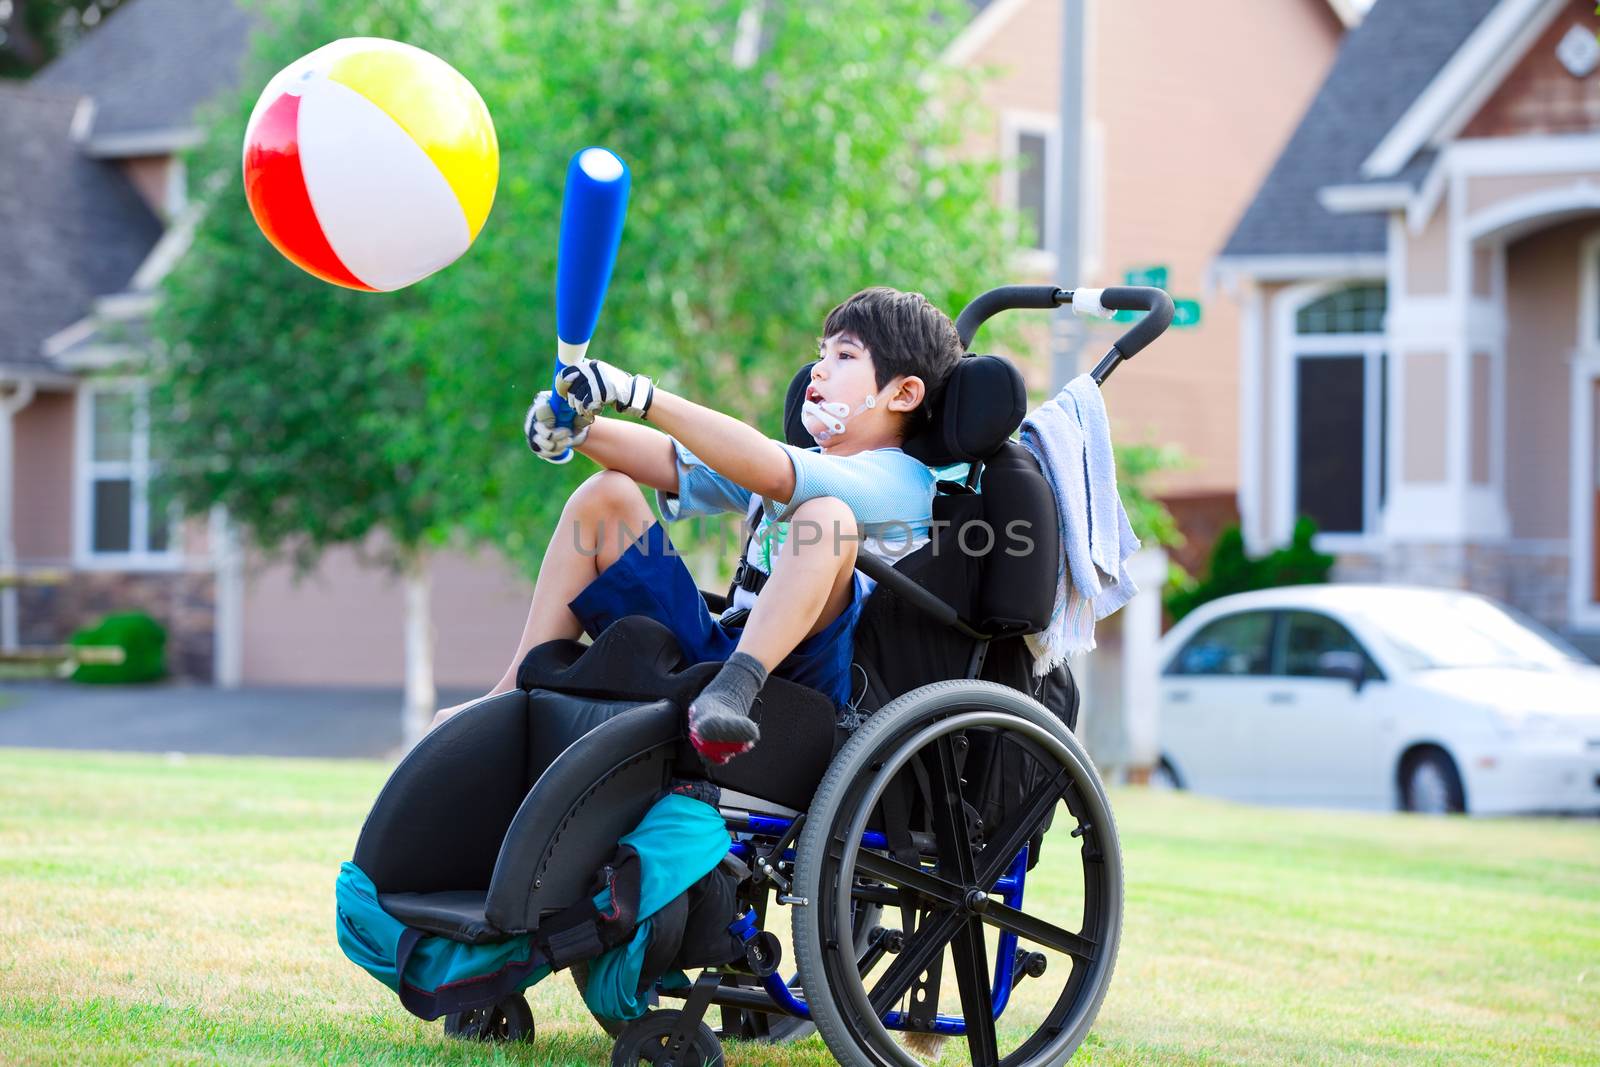 Disabled little boy playing ball in the park